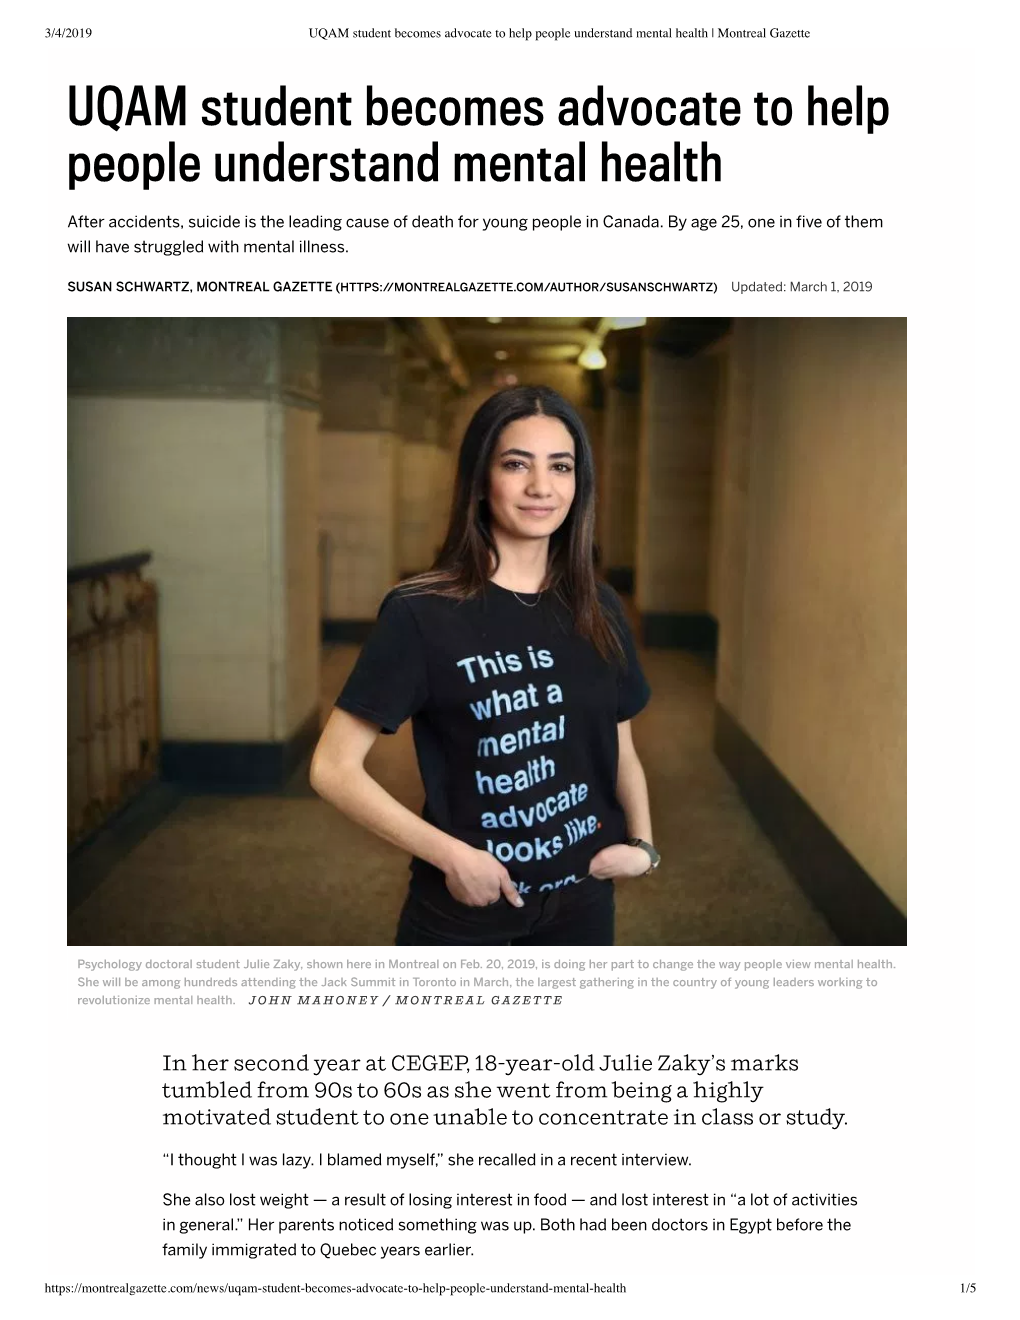 UQAM Student Becomes Advocate to Help P...Stand Mental Health | Montreal Gazette